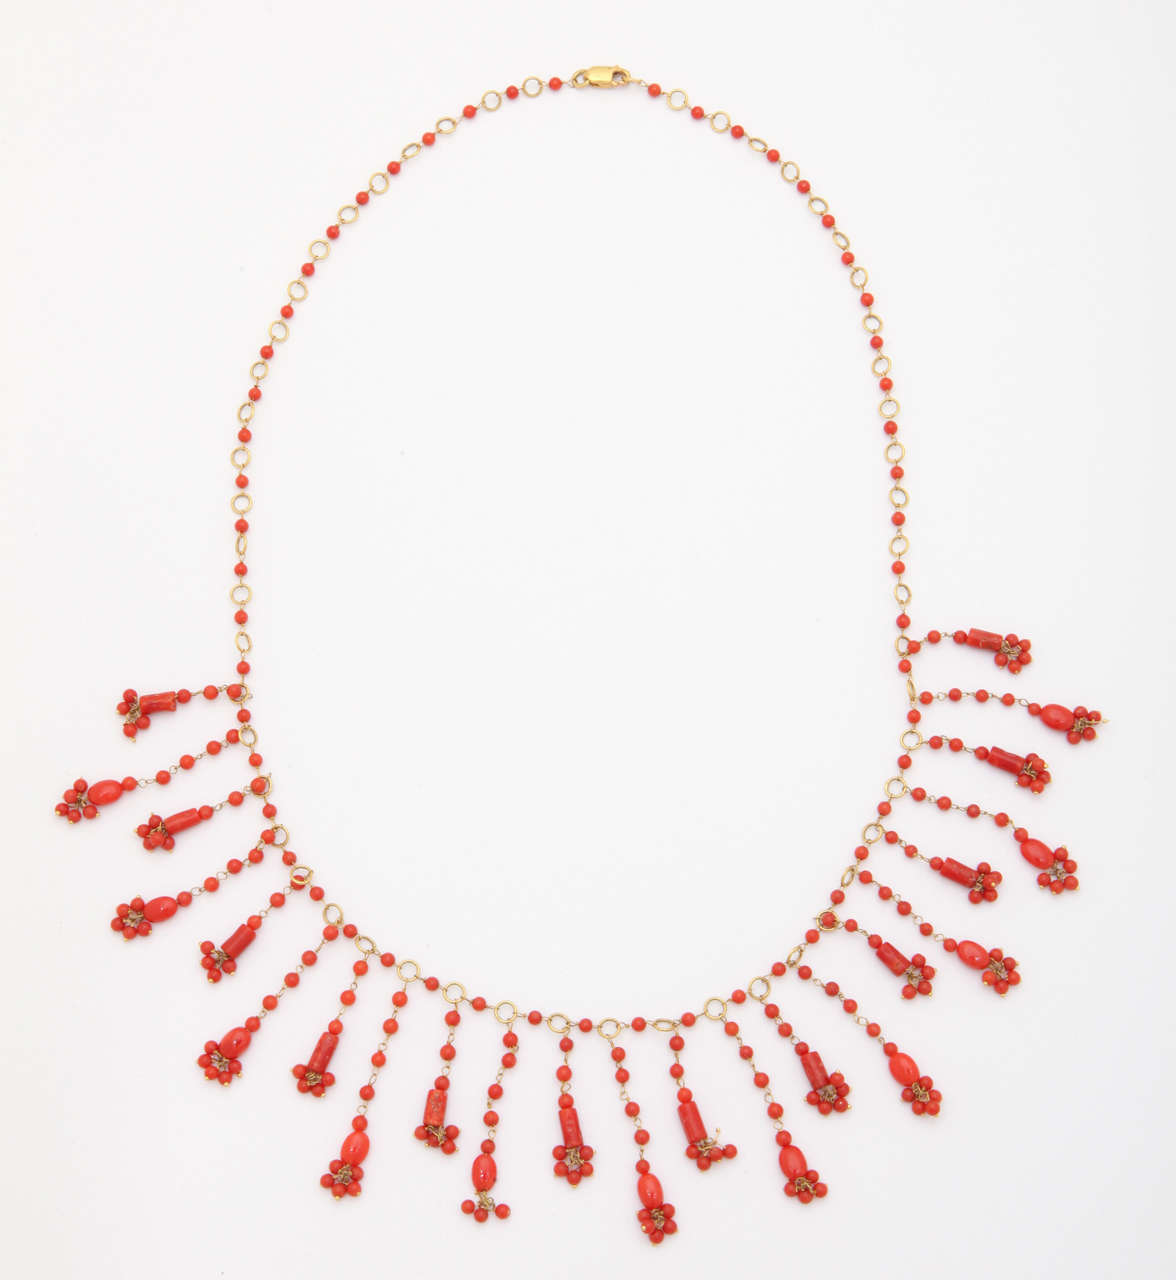 The bright red/orange coral beads are wrapped  with 18 kt gold wire. The total length is 18 1/2 in. This necklace is light and delicate, great for the summer.
Earrings can be made to match.